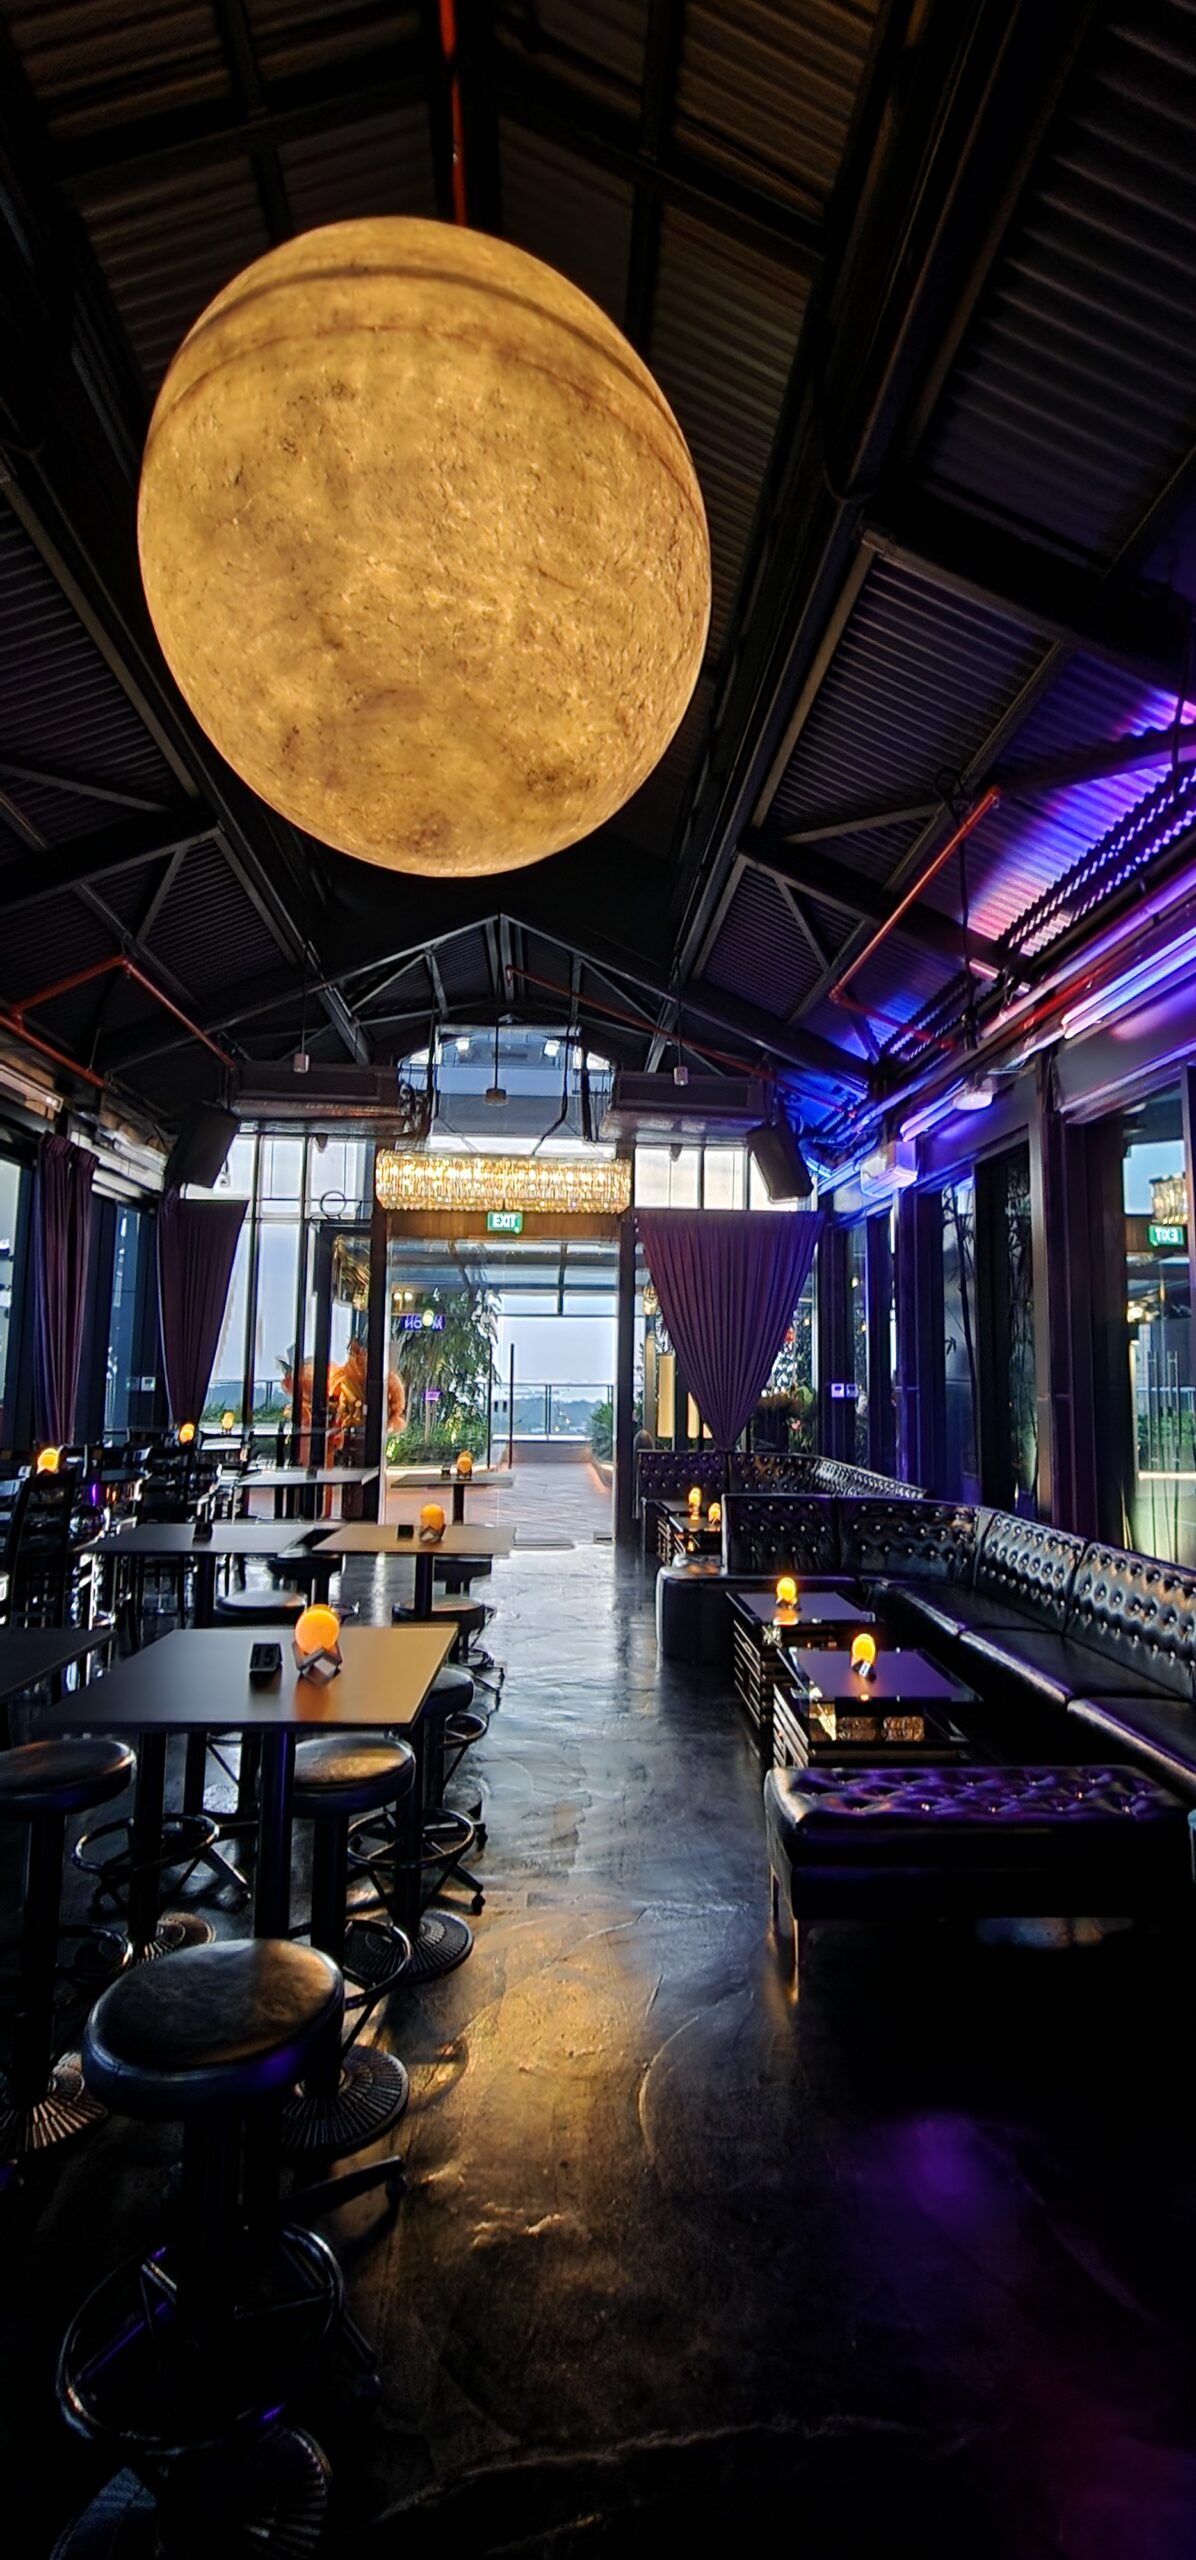 Singapore’s Moon Themed Rooftop Bar